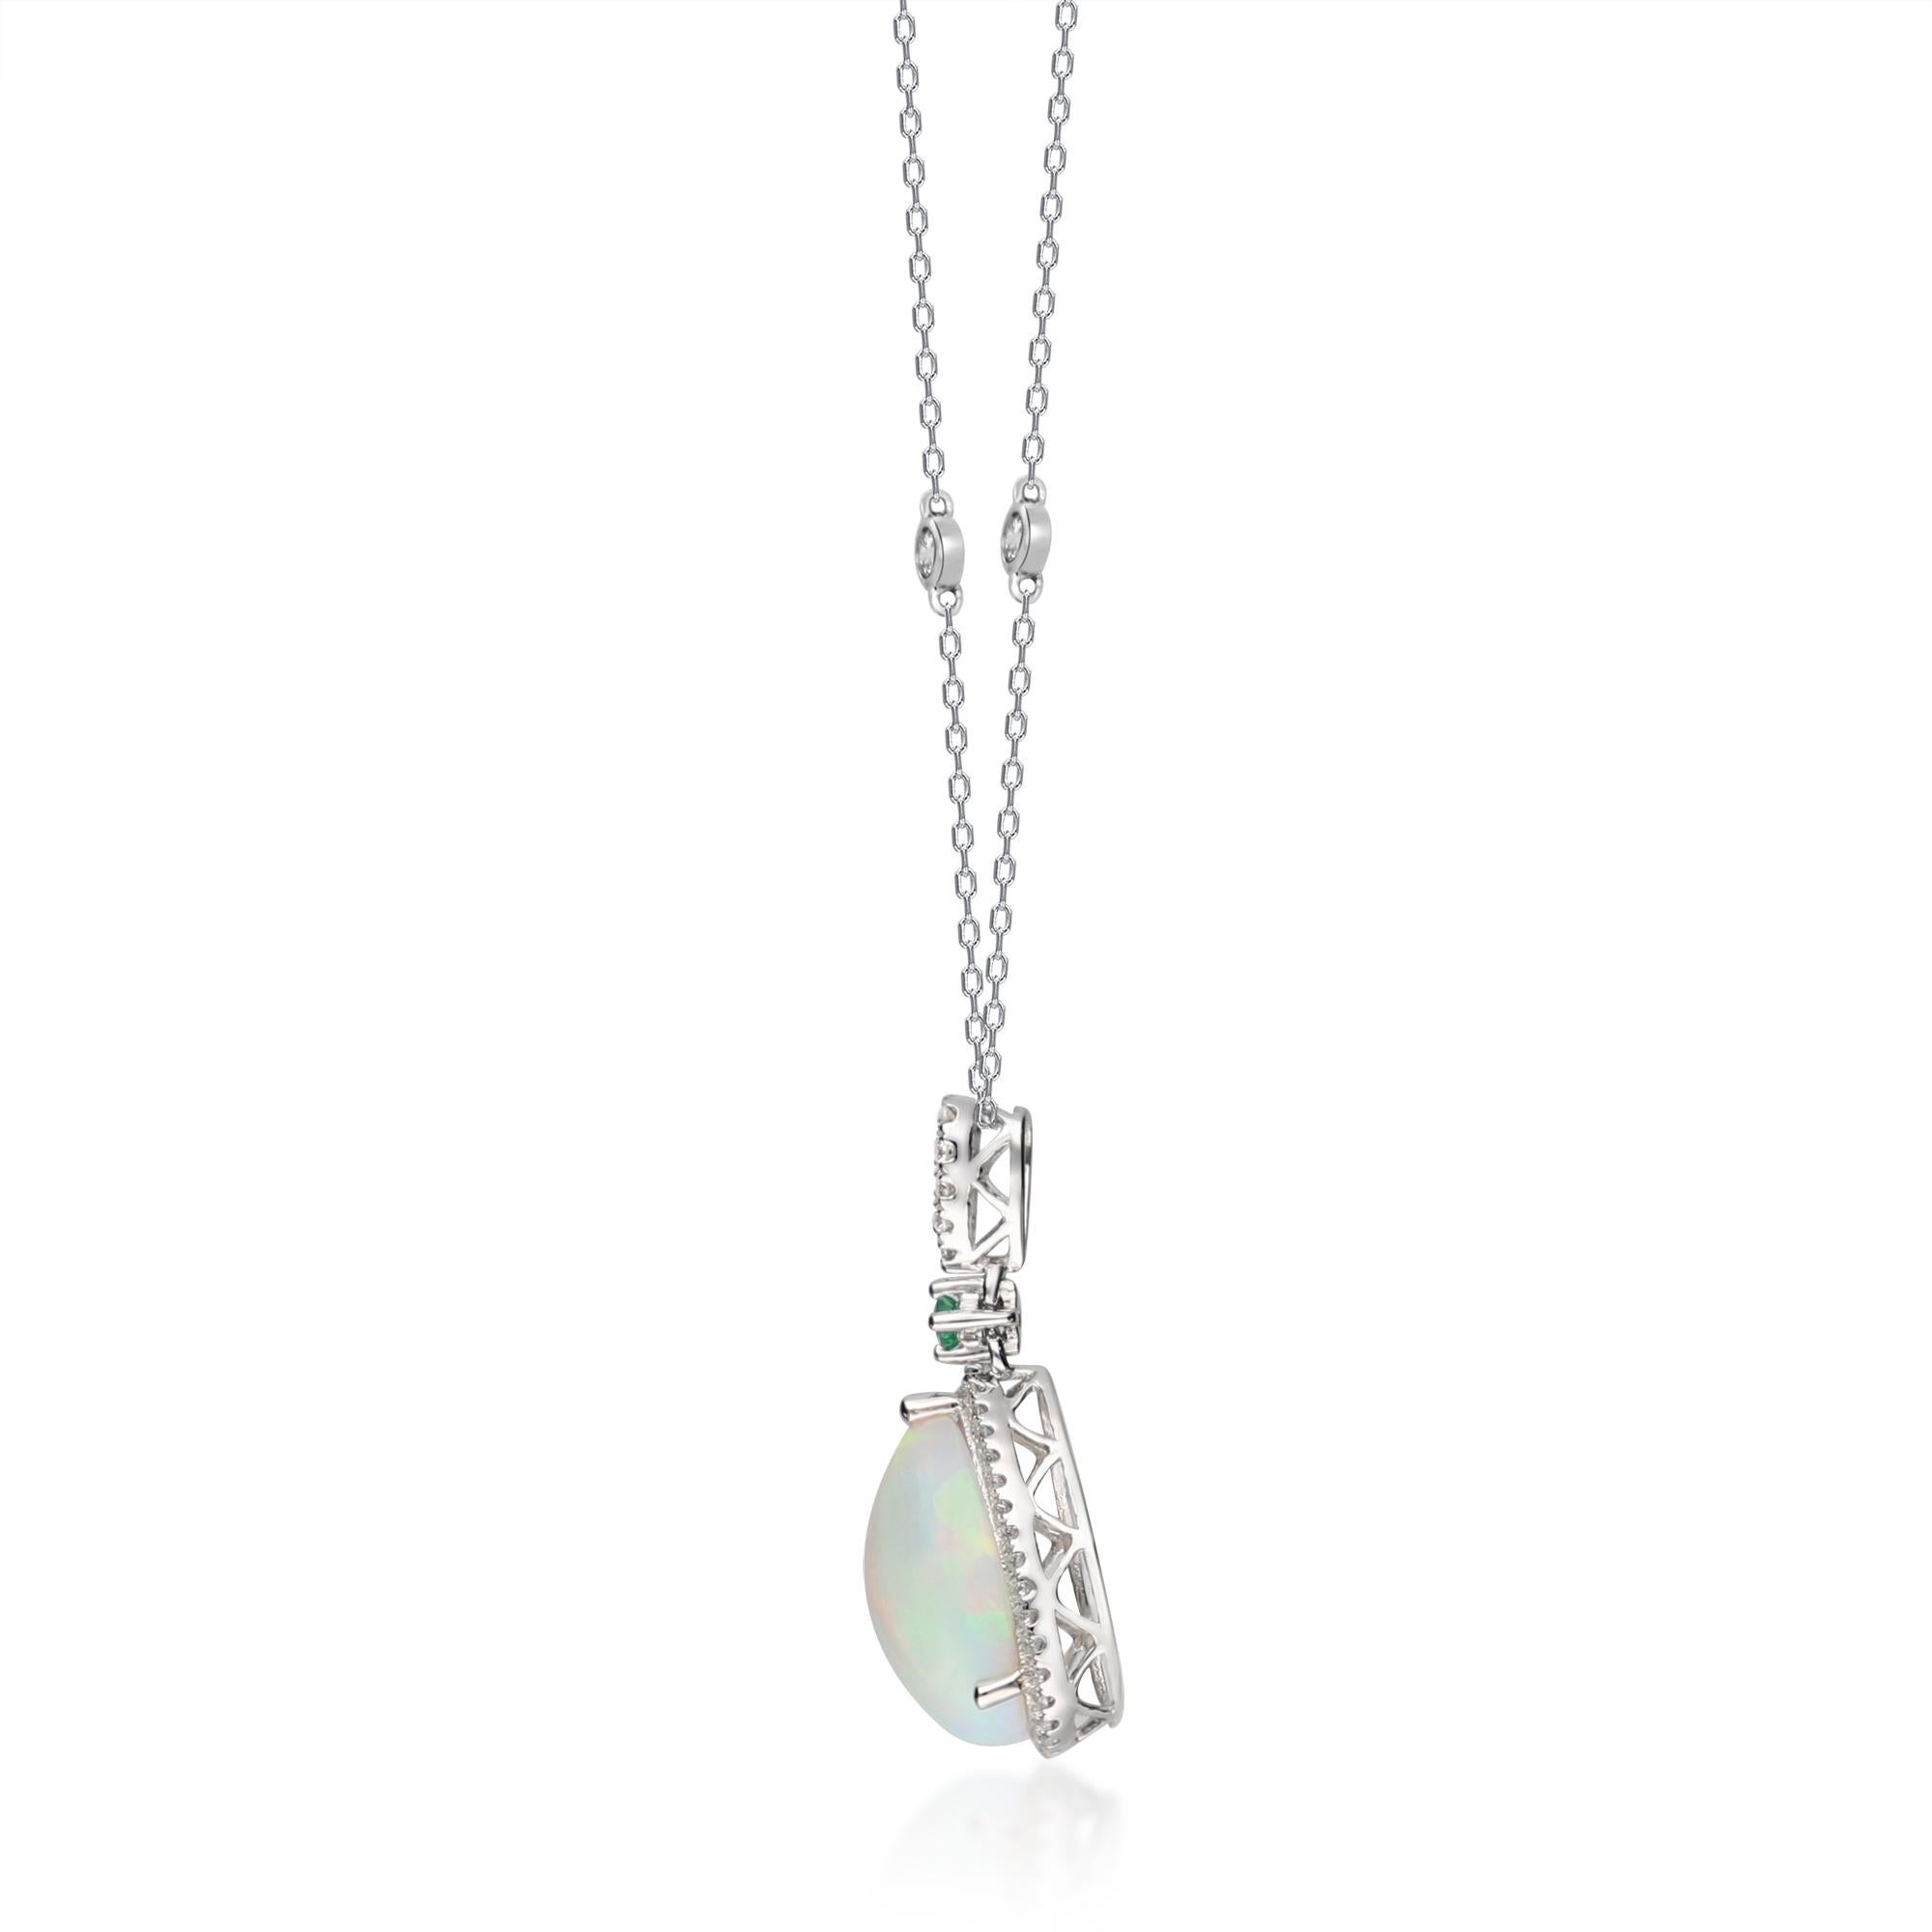 Decorate yourself in elegance with this Pendant is crafted from 14-karat Yellow Gold by Gin & Grace. This Pendant is made up of Pear-cab Ethiopian Opal (1 pcs) 2.21 carat, Emerald Round (1 pcs) 0.06 carat and Round-cut White Diamond (49 Pcs) 0.36